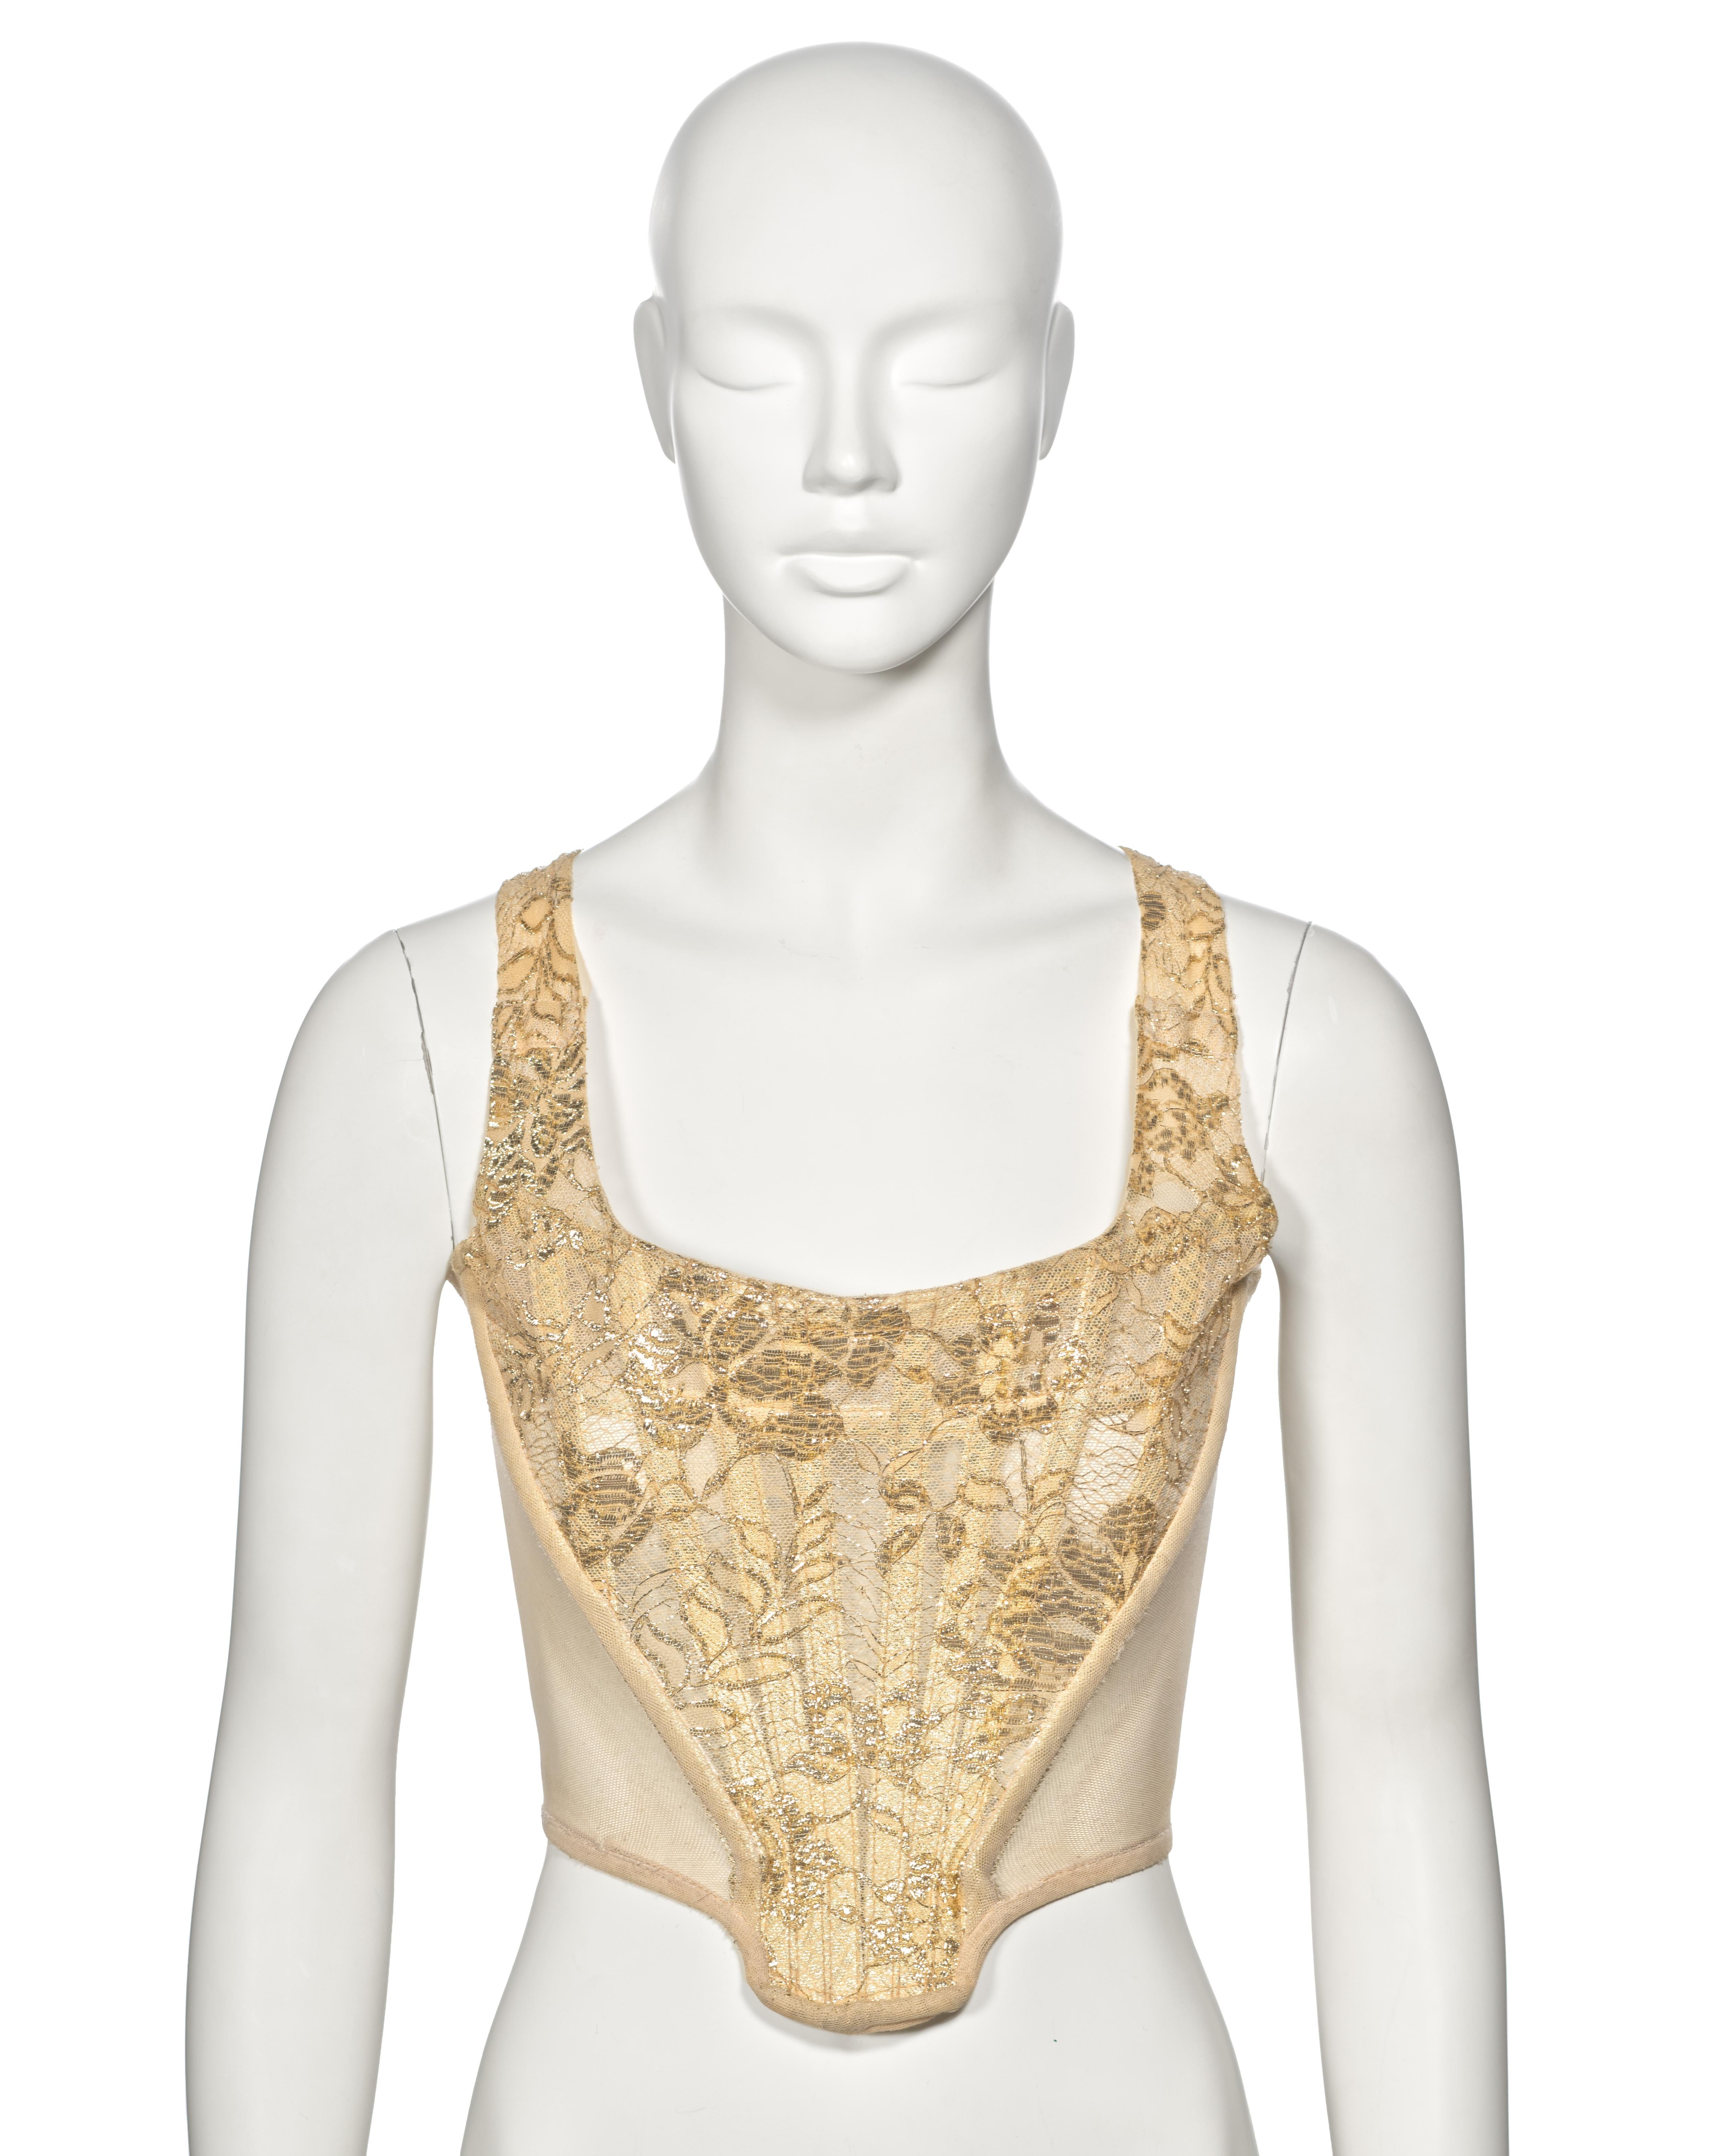 ▪ Archival Vivienne Westwood Corset
▪ Fall-Winter 1993
▪ Sold by One of a Kind Archive
▪ Gold metallic lace 
▪ Ivory cotton mesh side panels 
▪ Built-in boning 
▪ Zip closure at the centre-back  
▪ Size: UK10 - US6 - FR38
▪ Made in England

The